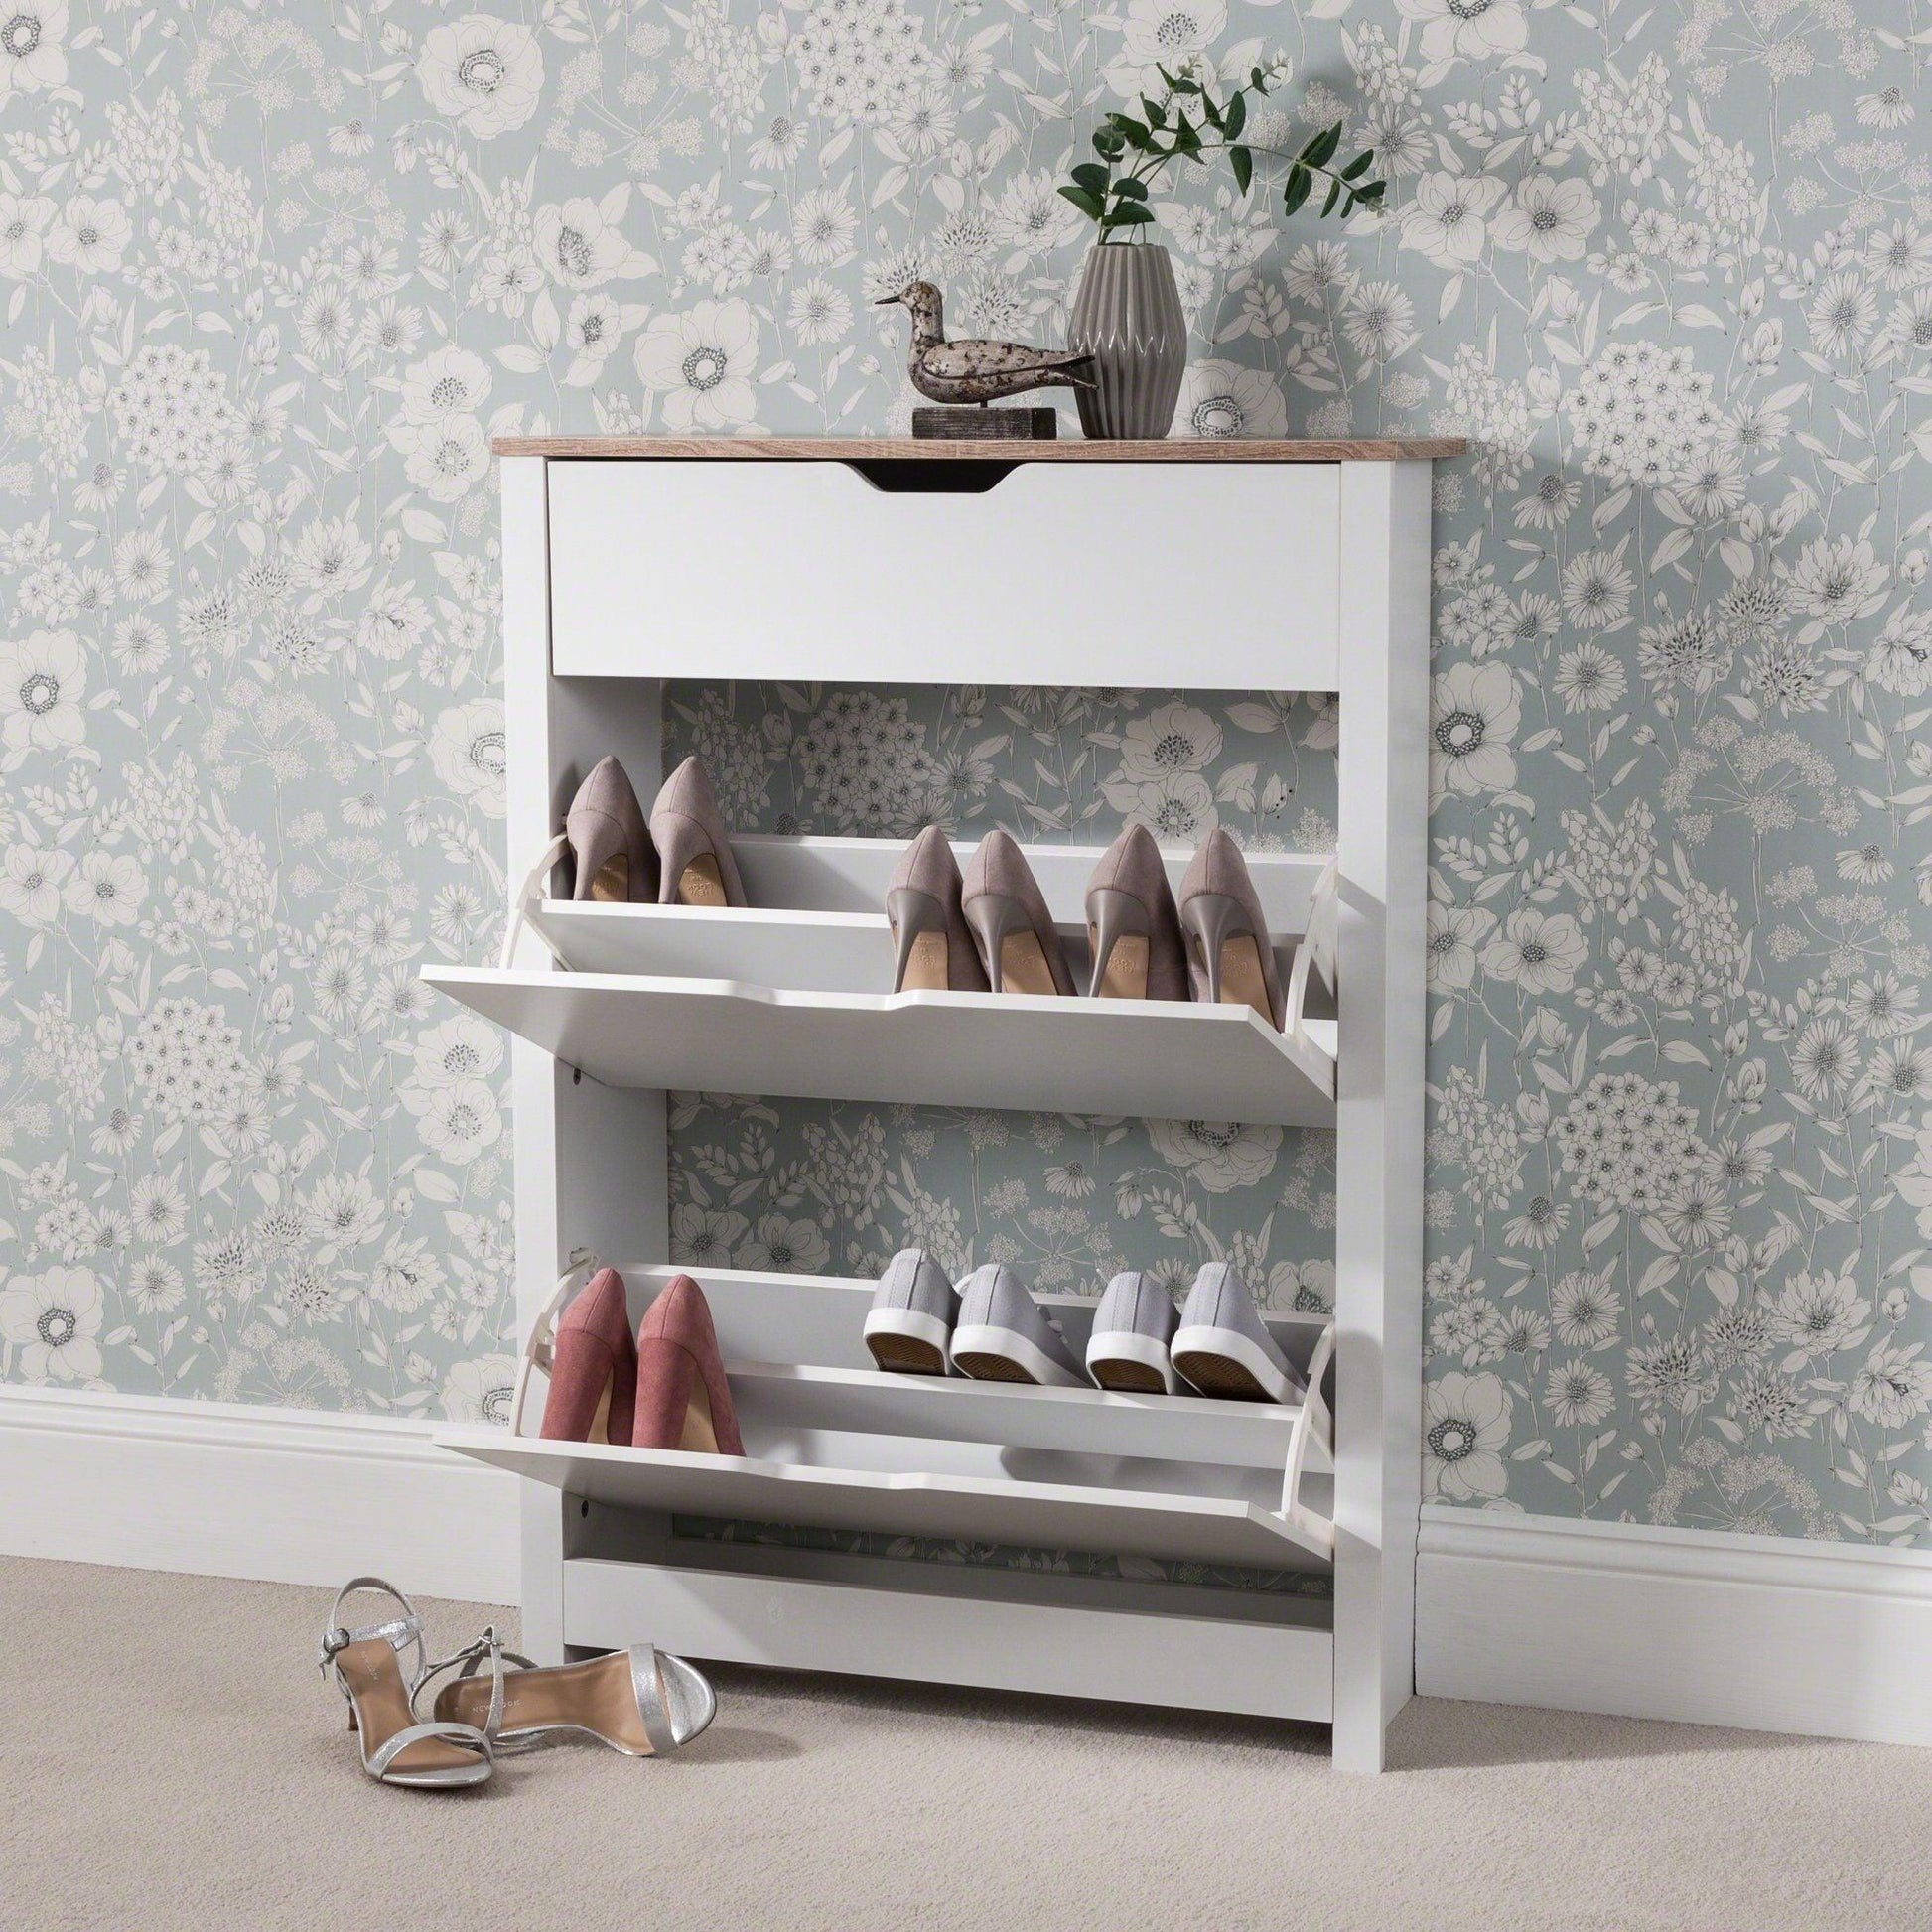 Shoe Cabinet Storage Wooden White - In Stock Date - 19th June 2020 - Laura James